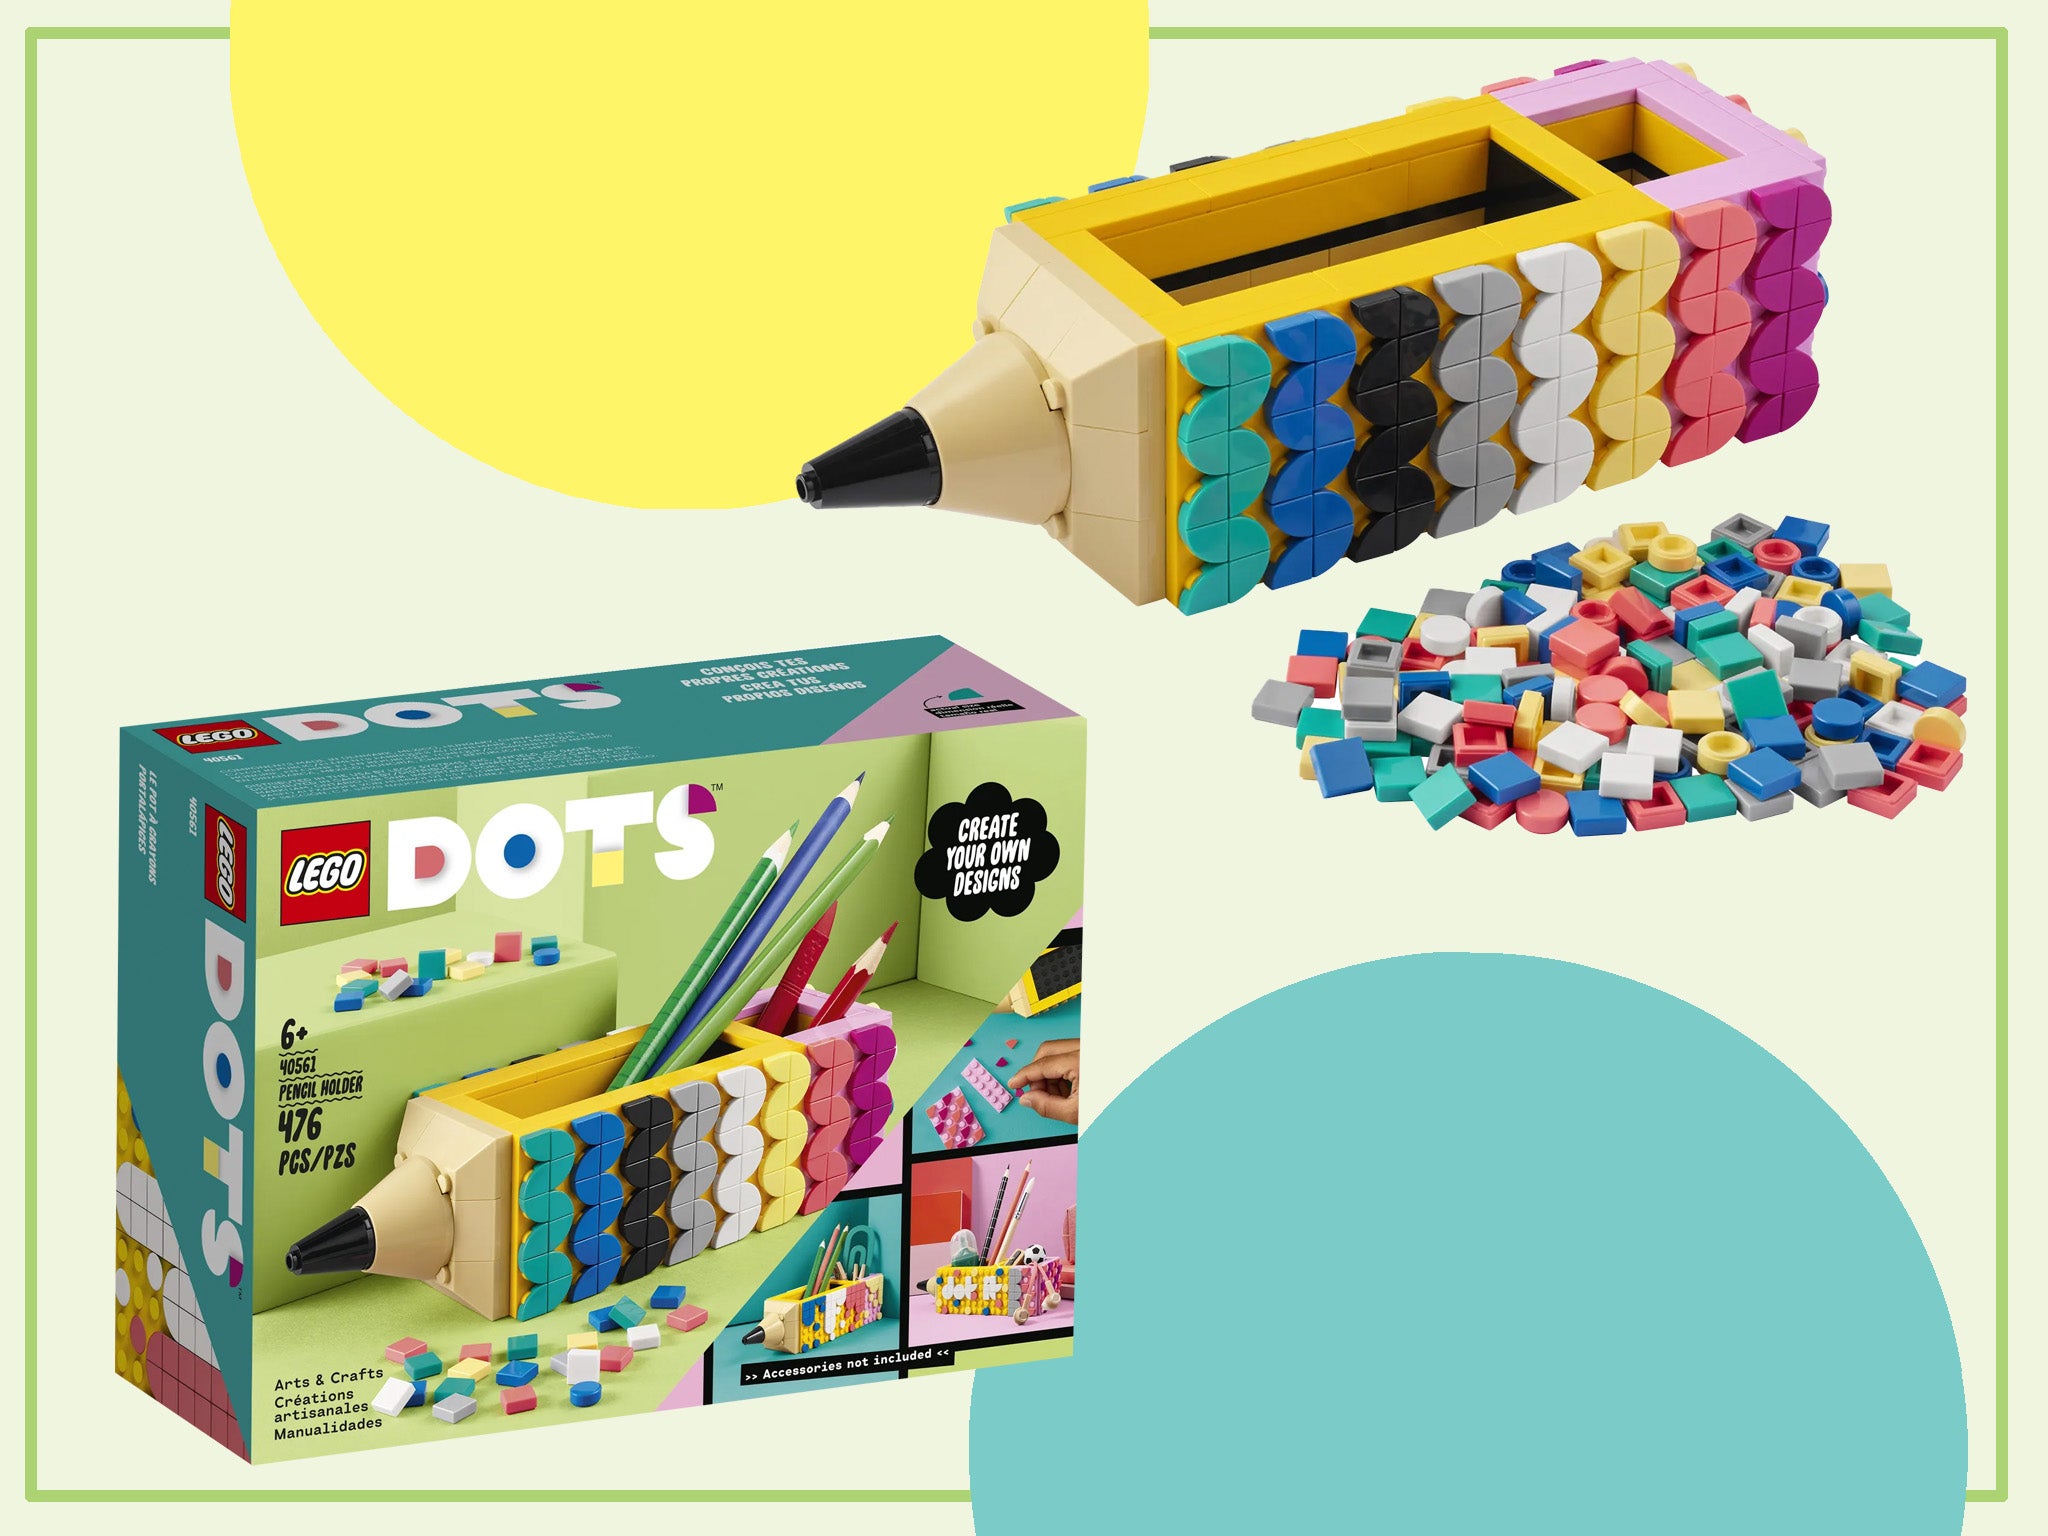 Back to school: How to bag Lego’s pencil-themed desk organiser for free 